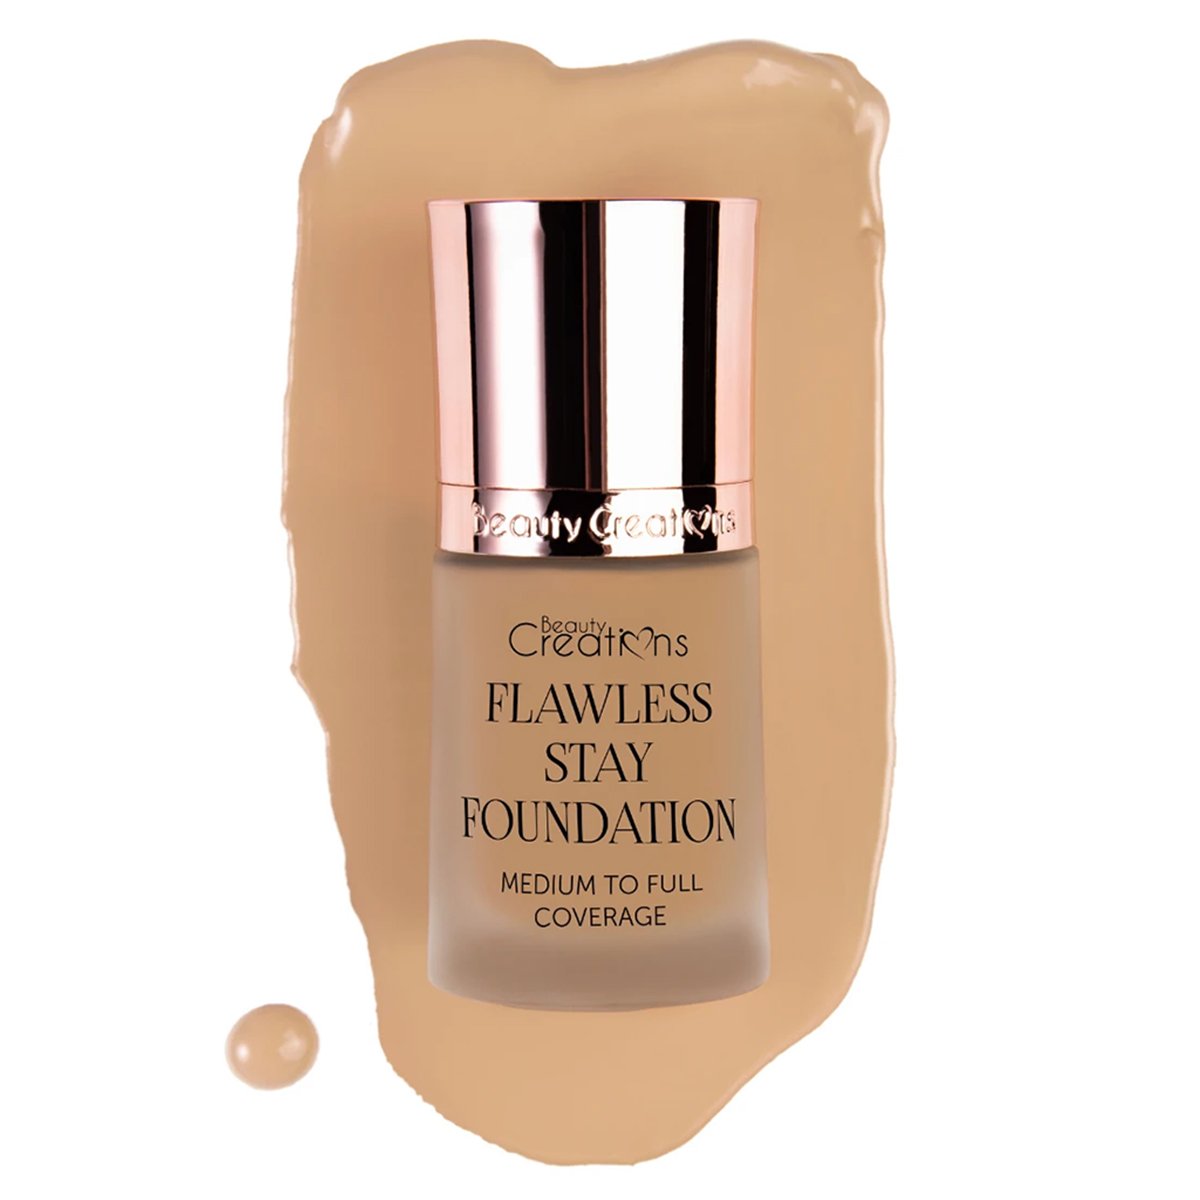 FLAWLESS STAY FOUNDATION 5 - BEAUTY CREATIONS